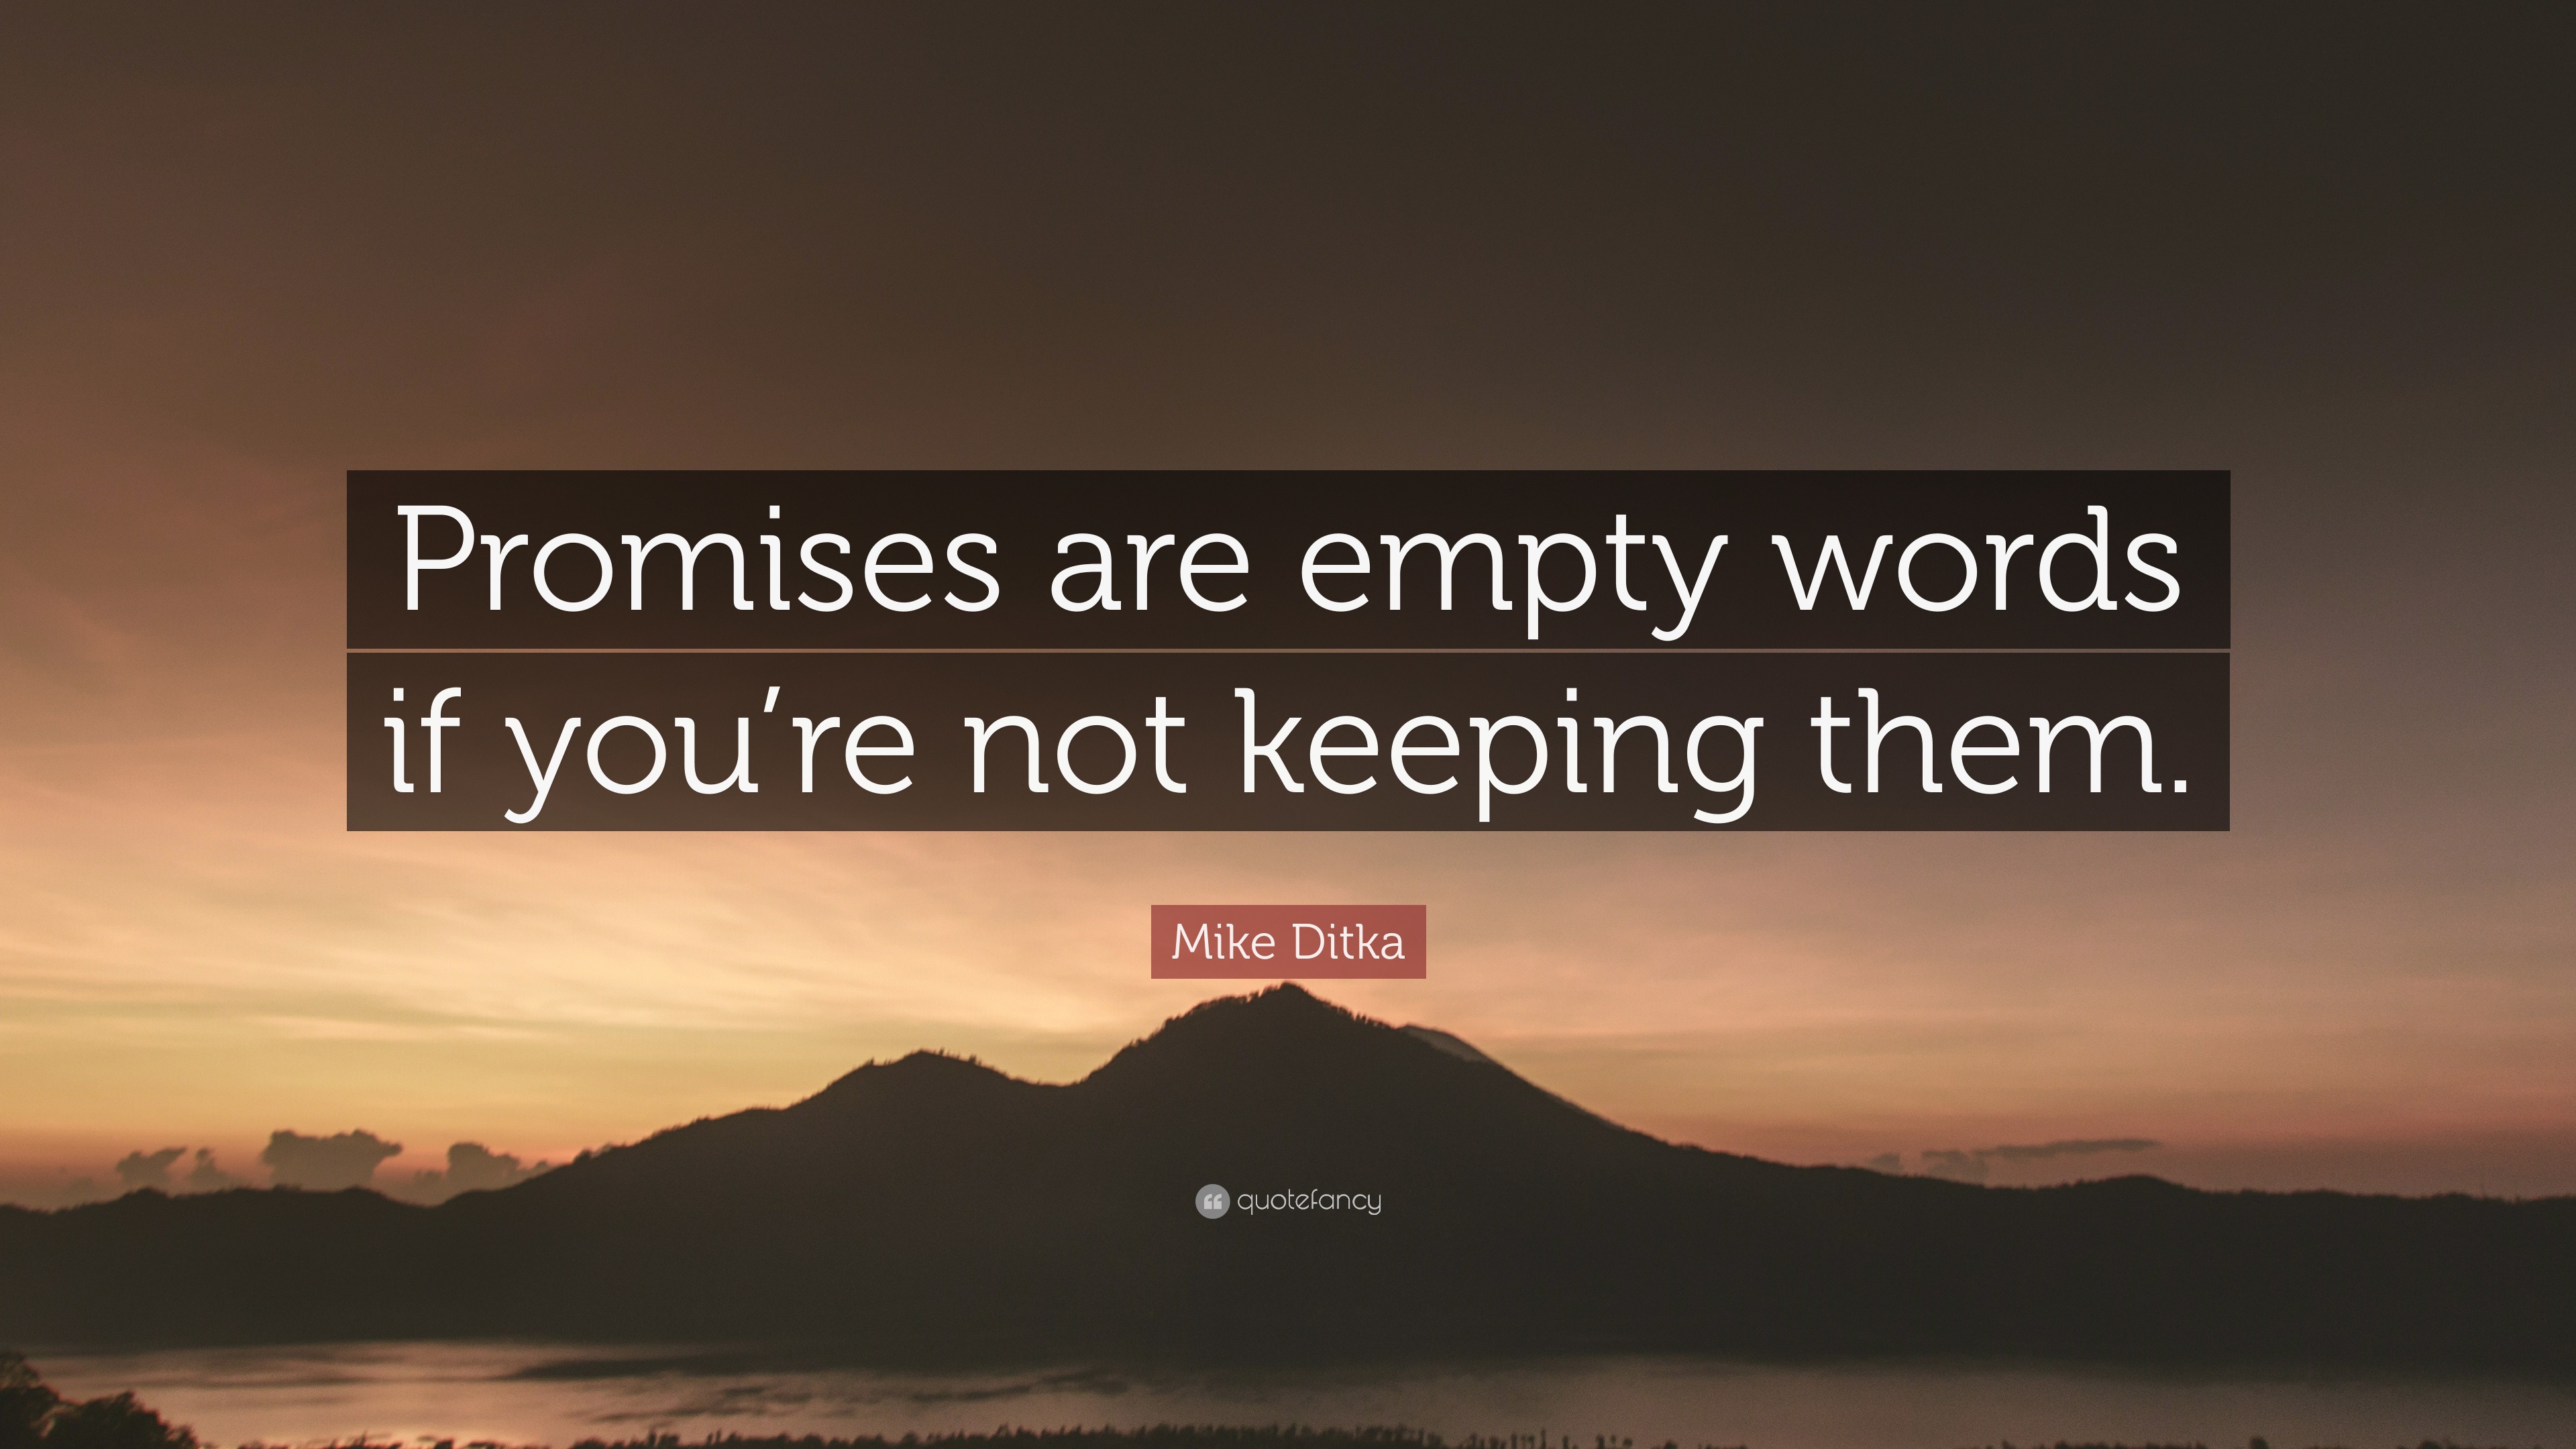 Mike Ditka Quote: "Promises are empty words if you're not ...